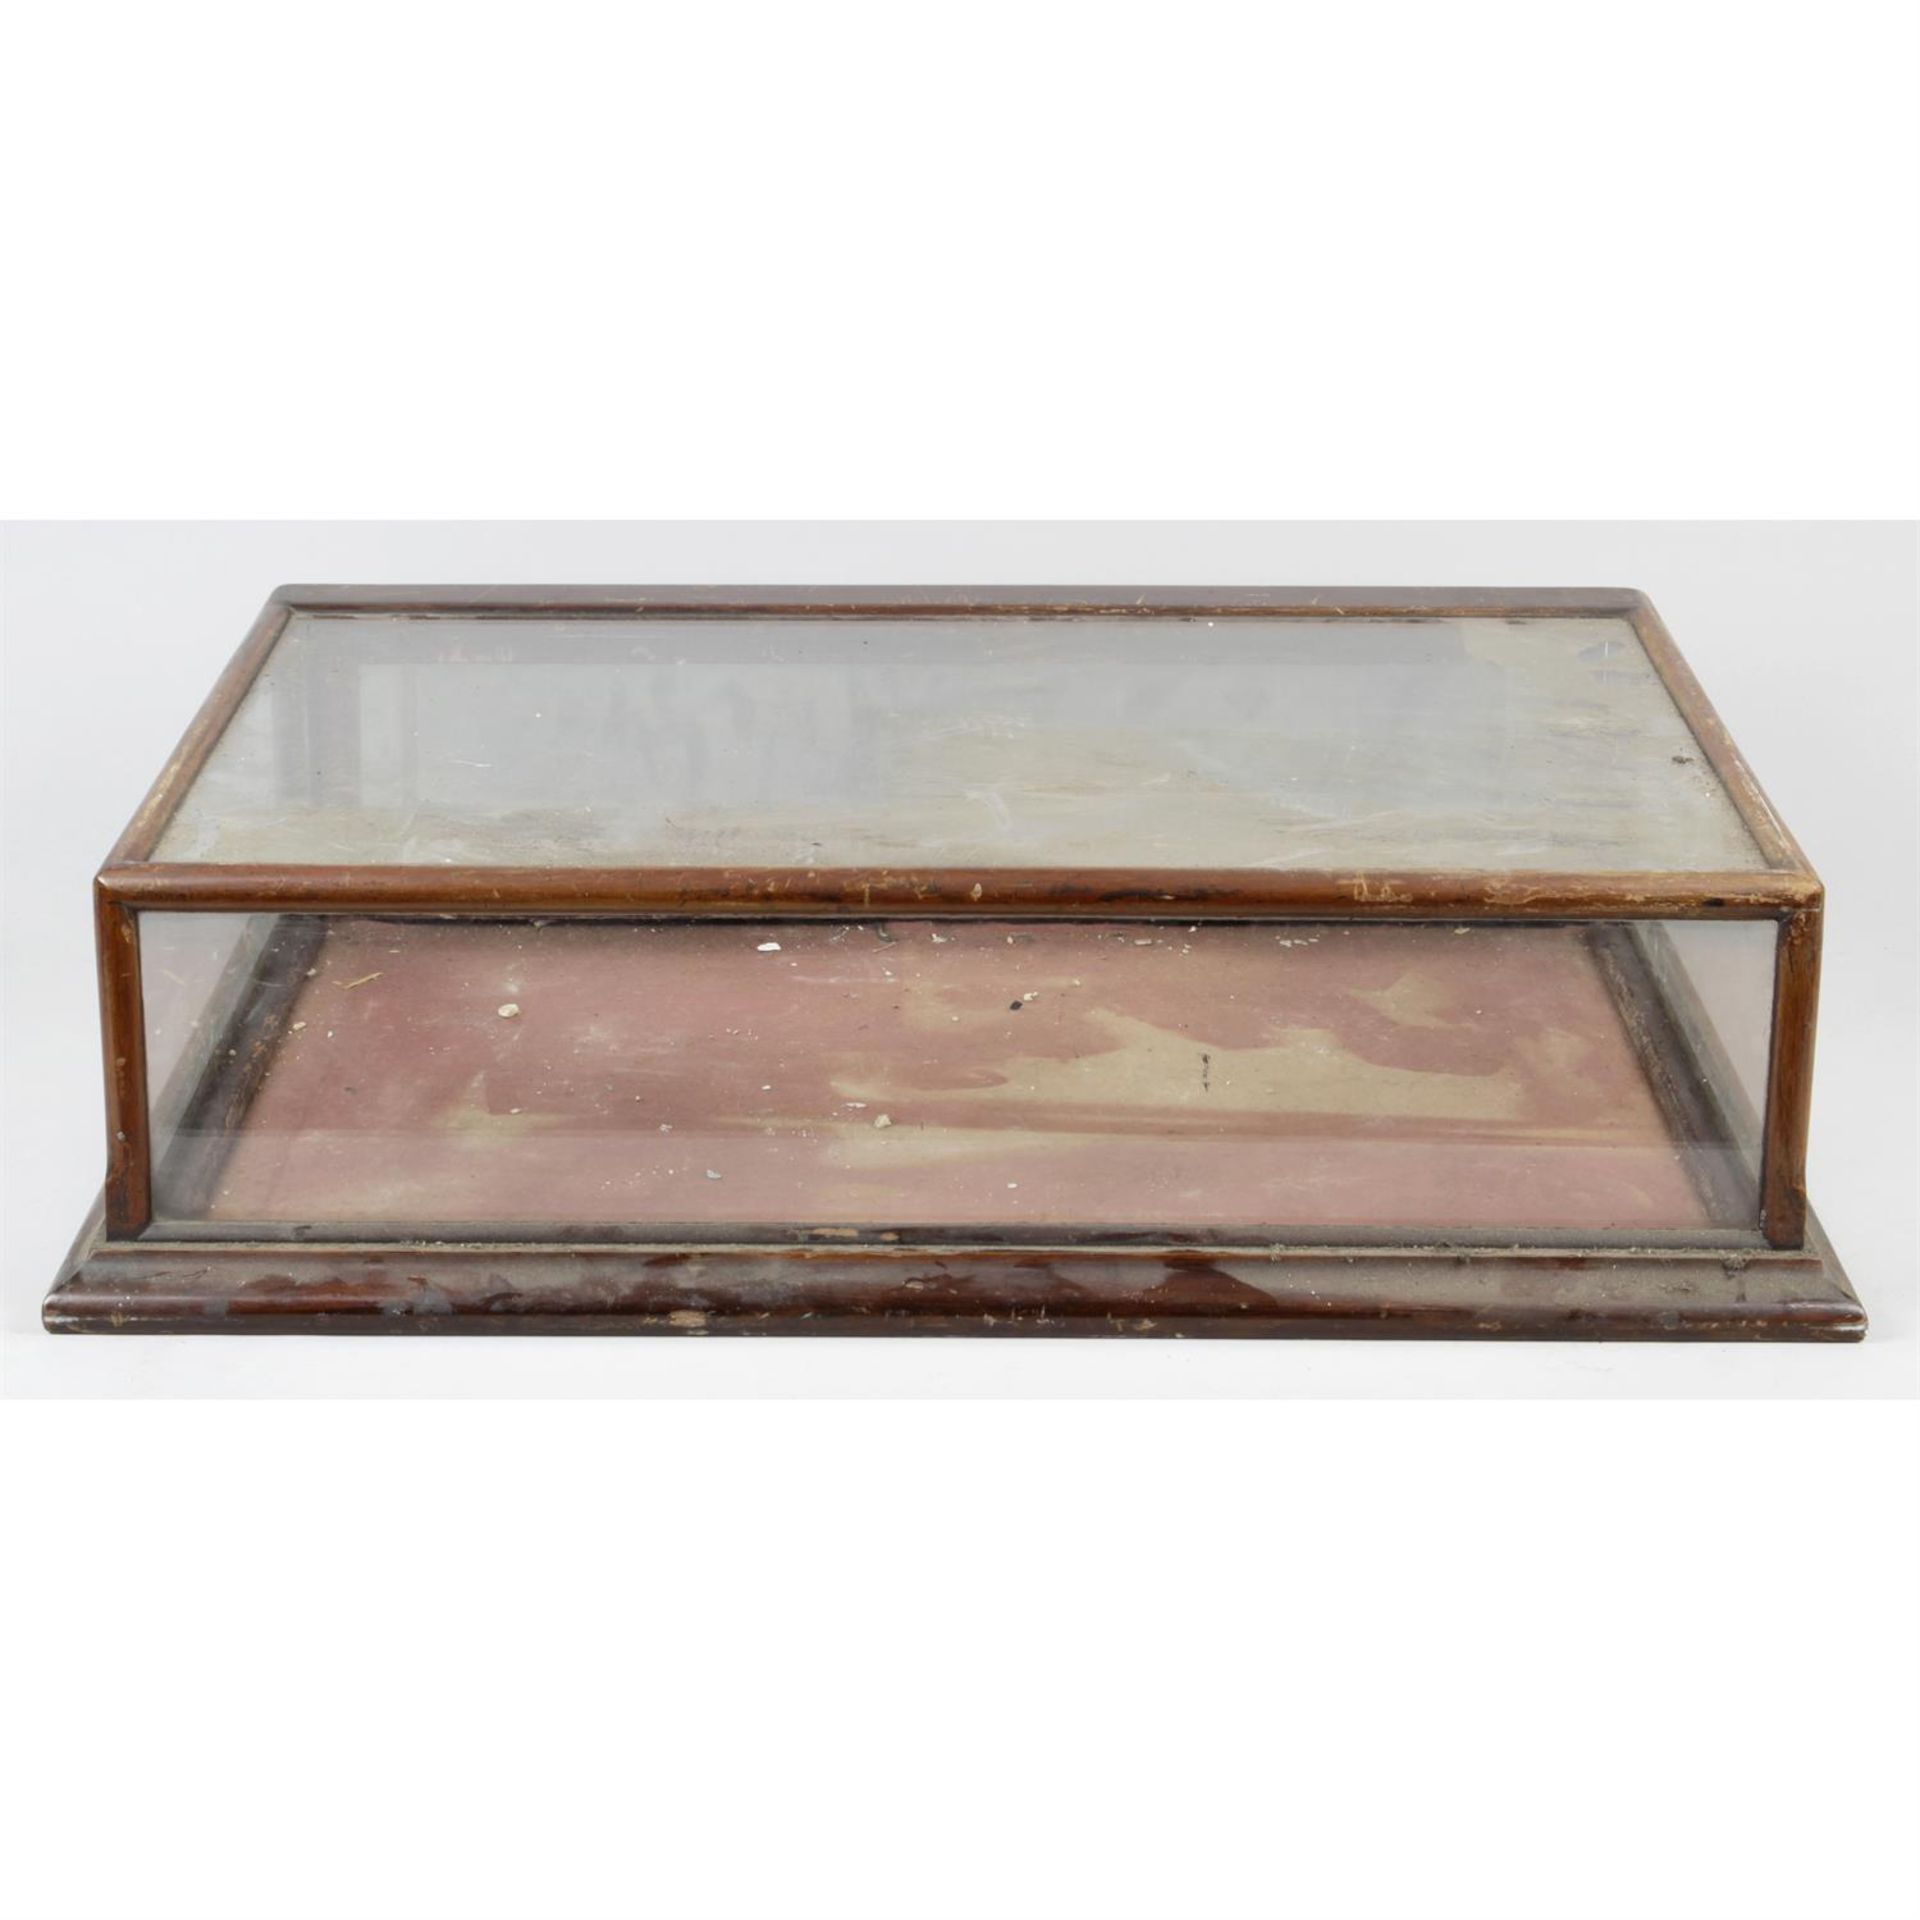 A small early 20th century stained mahogany table top display cabinet.